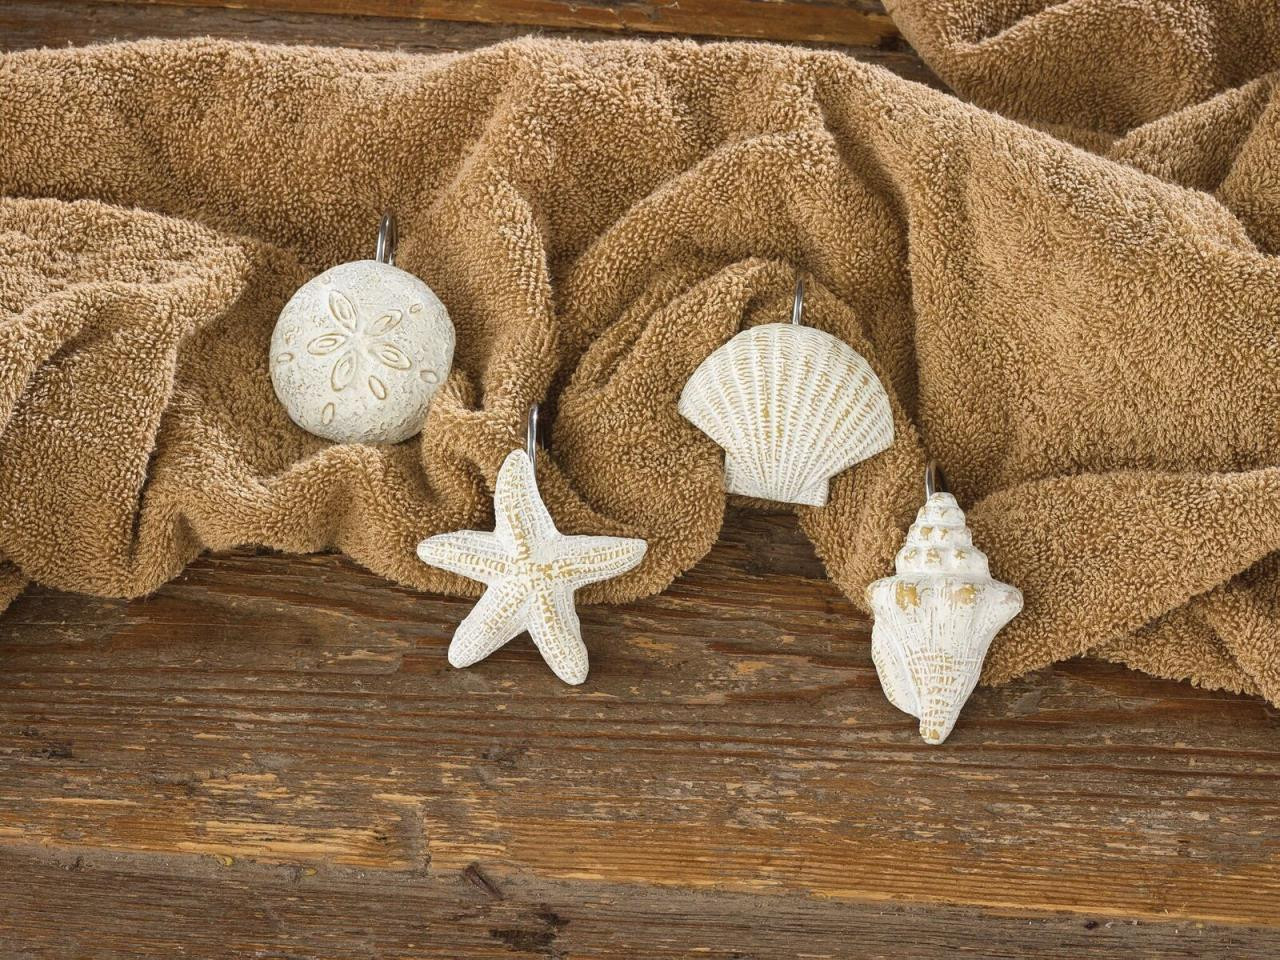 https://cdn11.bigcommerce.com/s-tfdhmk/images/stencil/1280x1280/products/13076/176787/Shells-Shower-Curtain-Hooks-Set-of-12-762242372368_image1__61216.1689047414.jpg?c=2